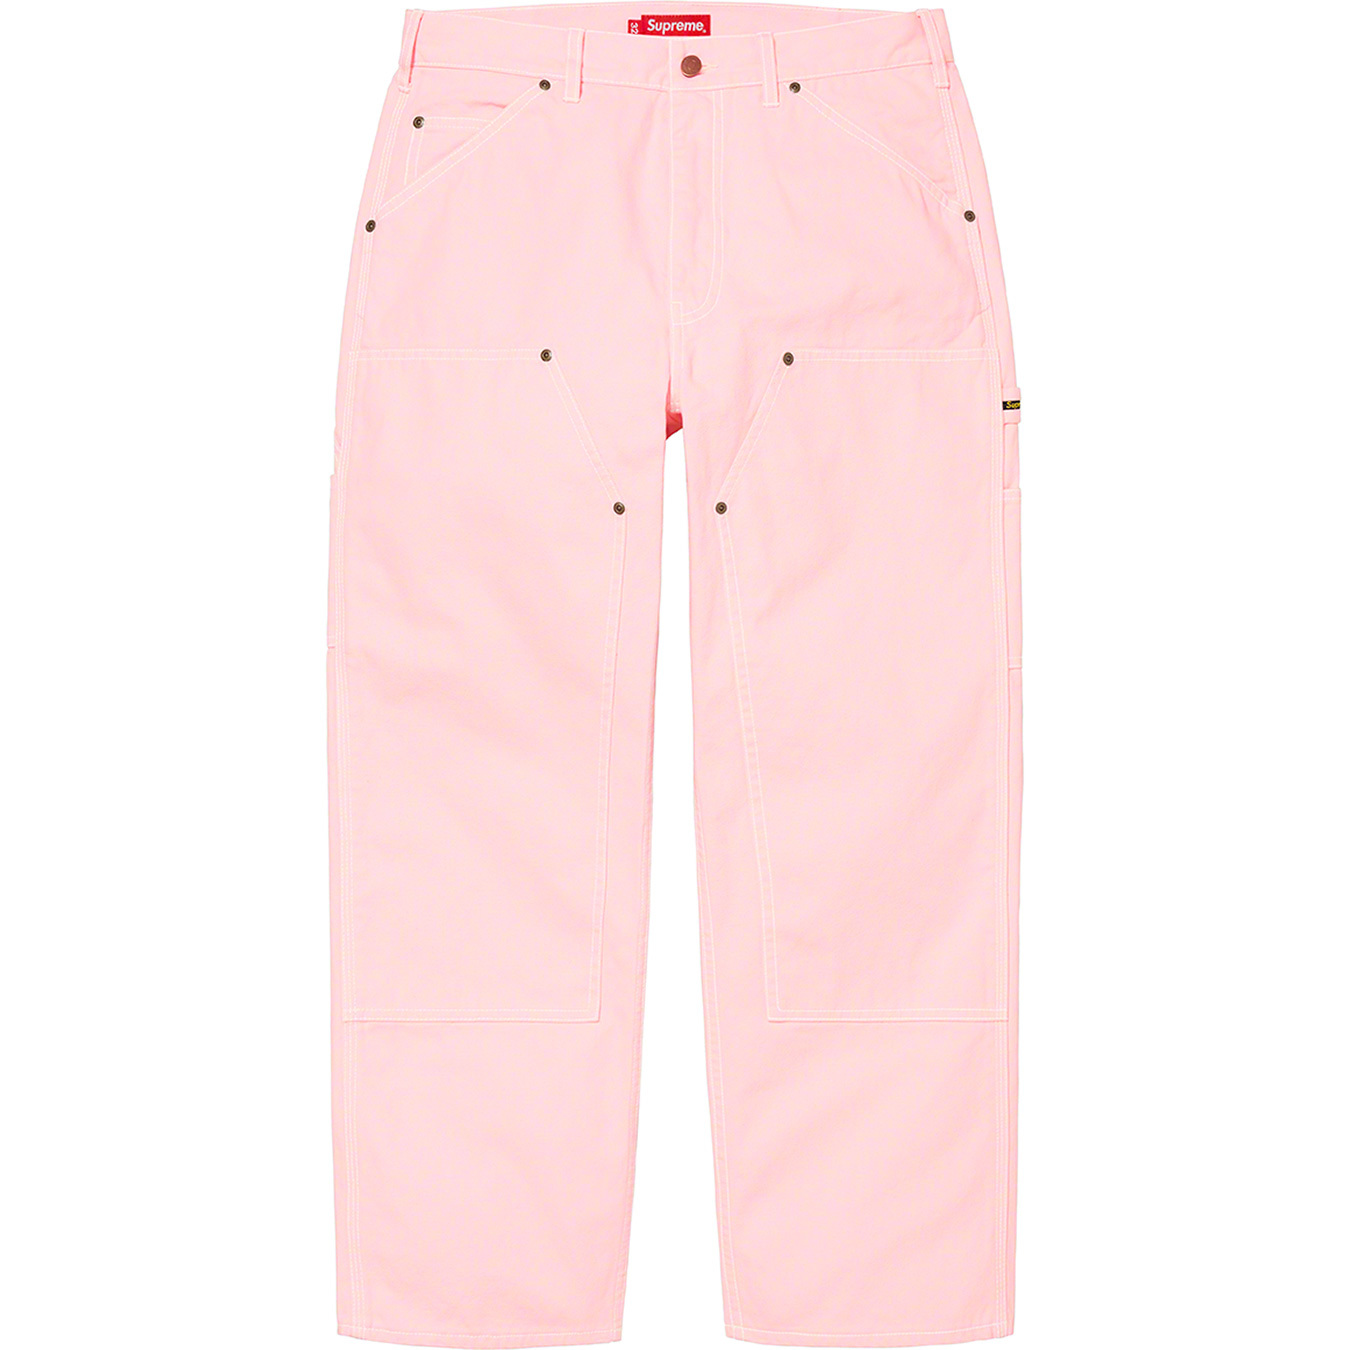 Double Knee Canvas Painter Pant - spring summer 2022 - Supreme